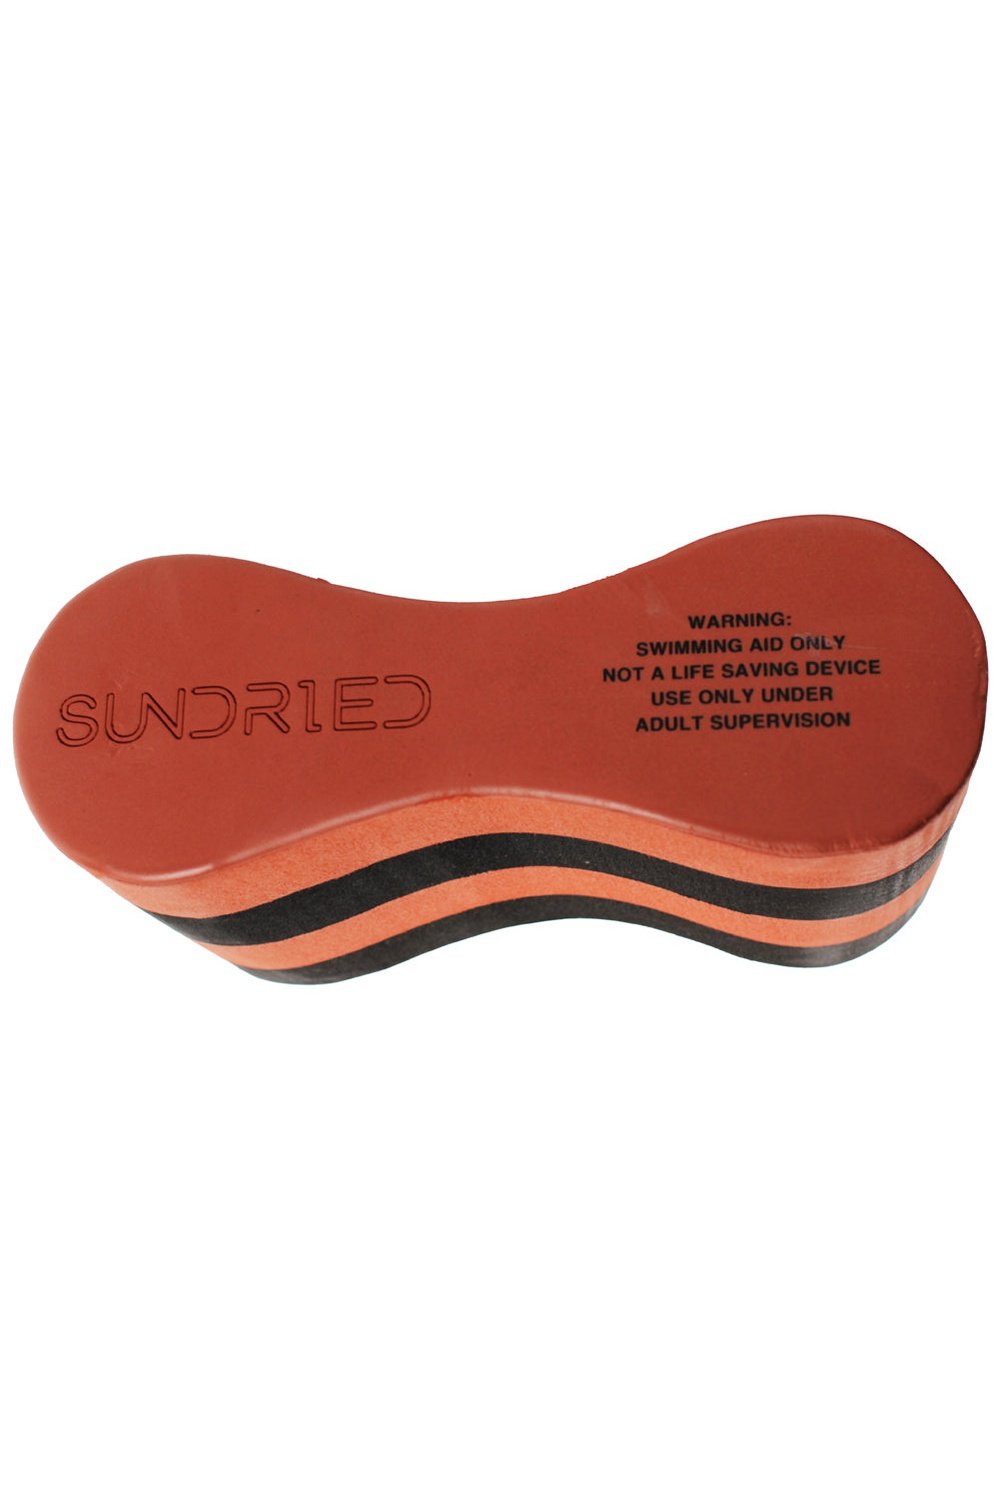 Sundried Pullbuoy Float Swimming Accessories SD0348 Activewear